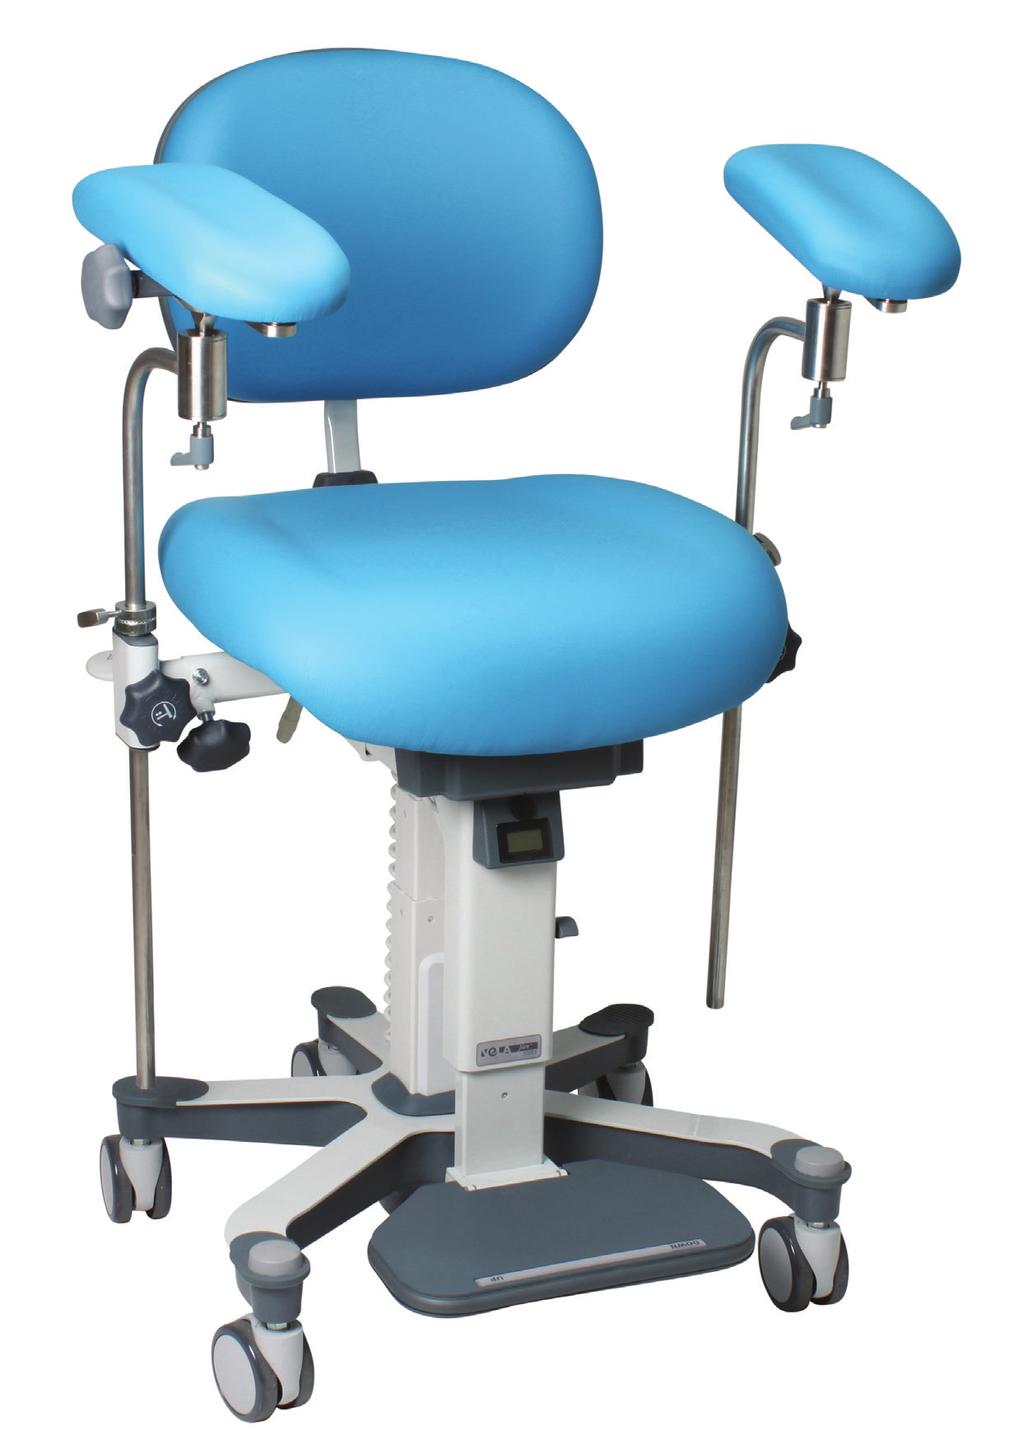 Poppy 774 AL Peacock 770 Jet 776 Grass 775 Ivory 773 Black 771 Meteor 777 Artesian 772 VELA Surgeons Chair 110Kg This Surgeons Chair has been designed to provide optimal positioning and comfort for